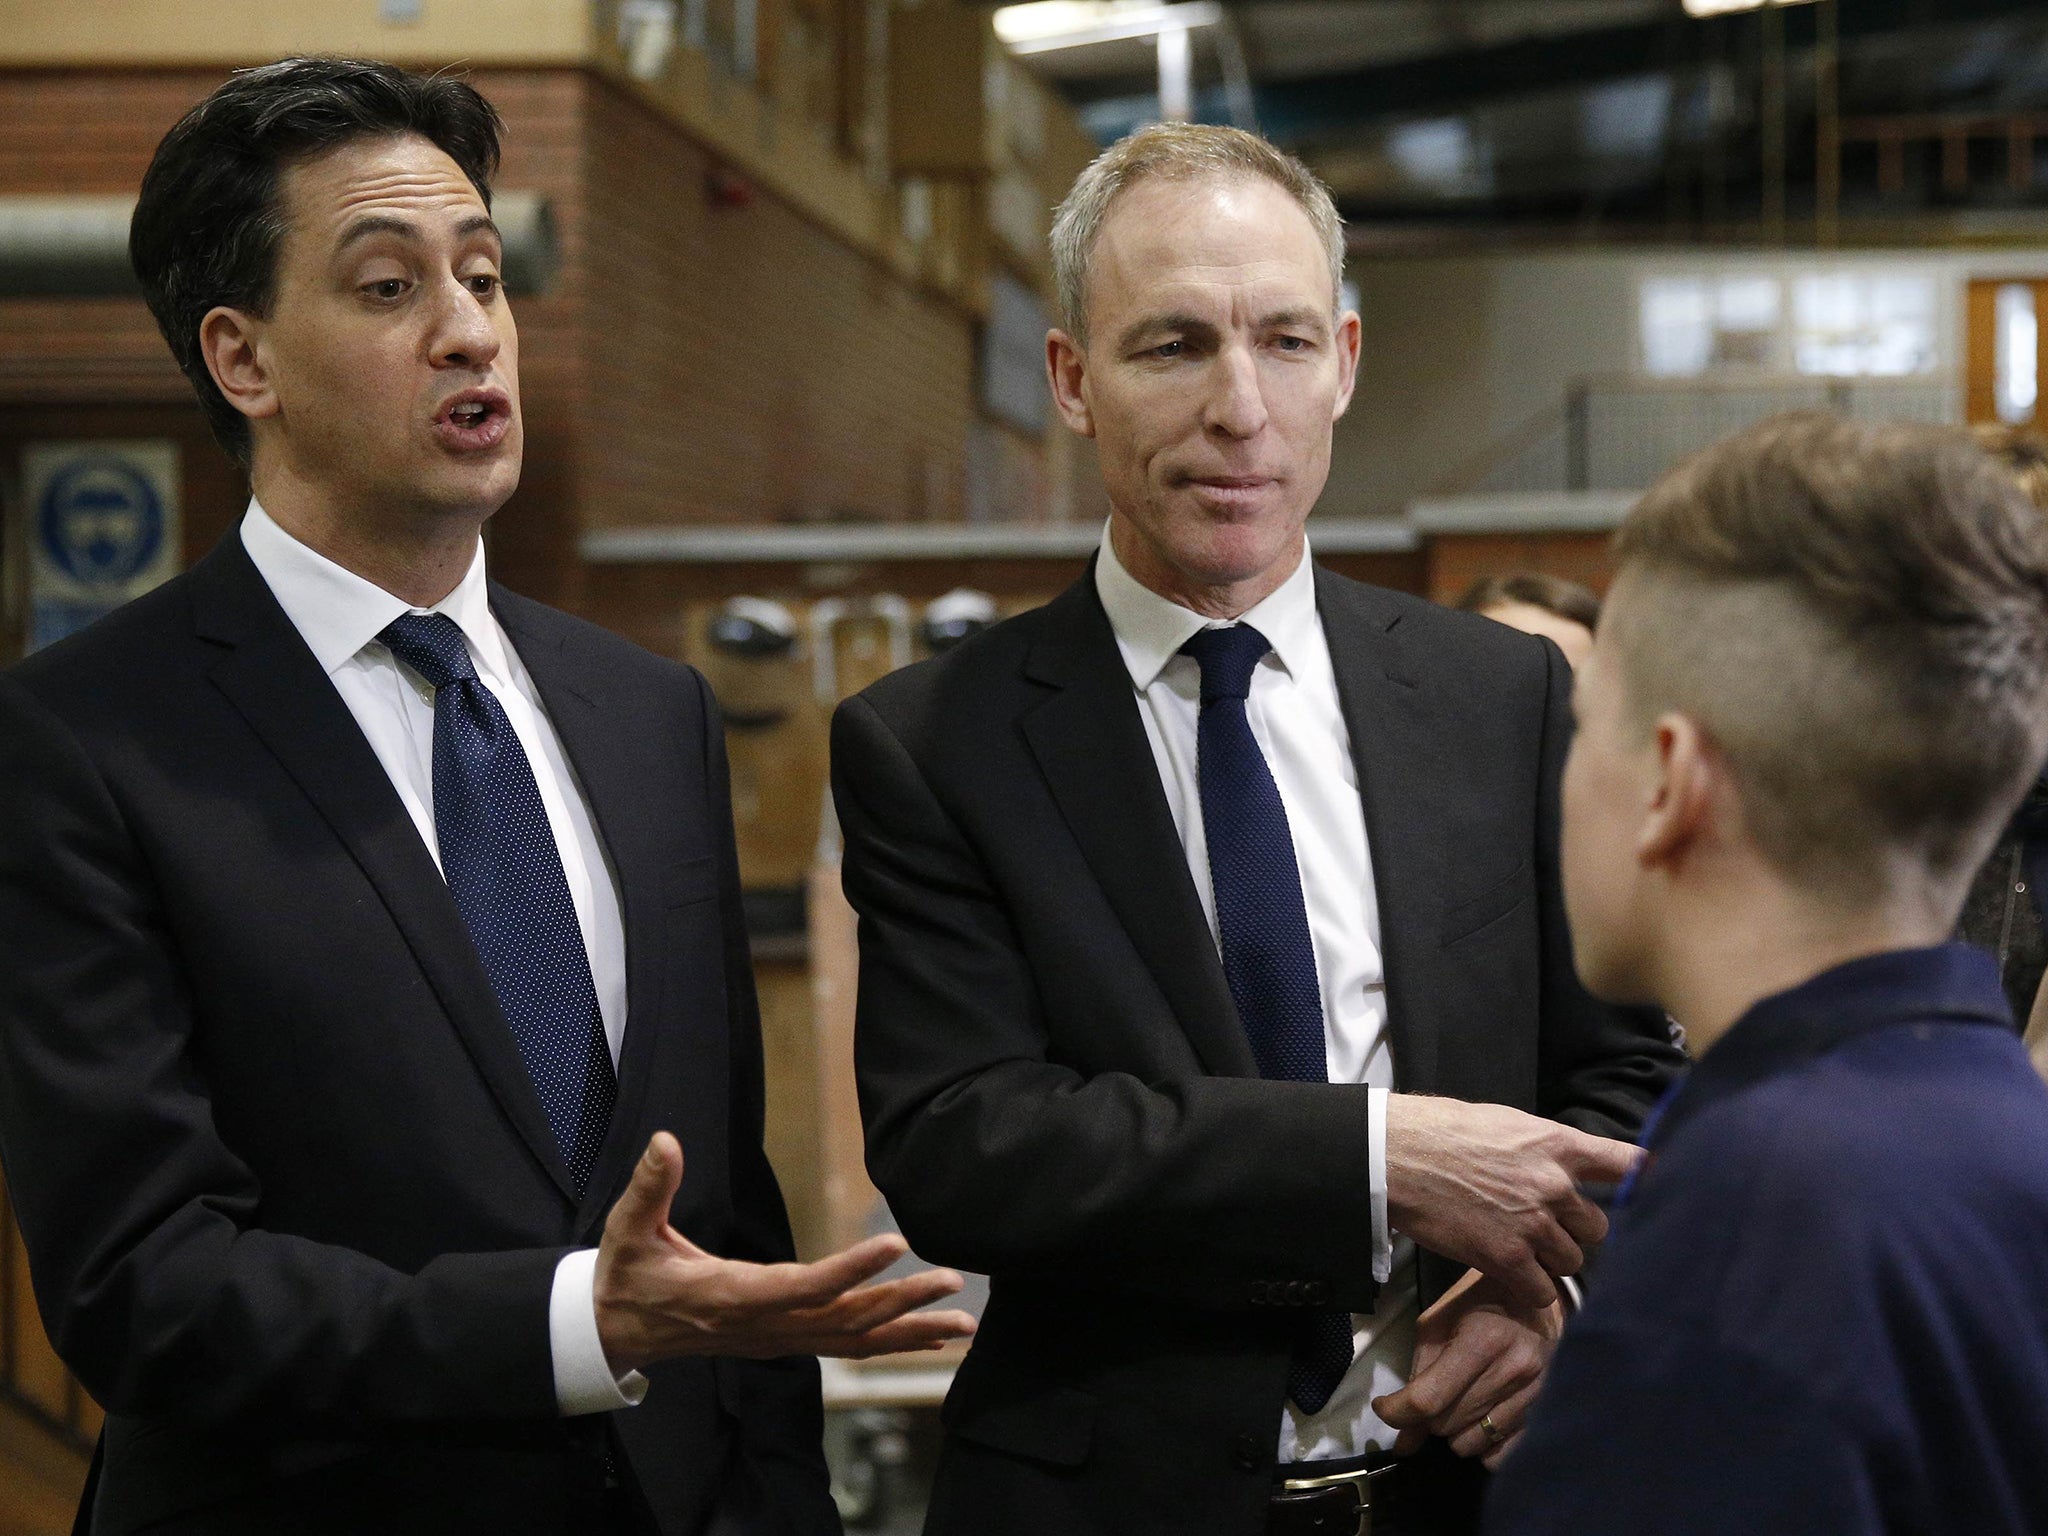 Ed Miliband and Jim Murphy, the Scottish Labour leader